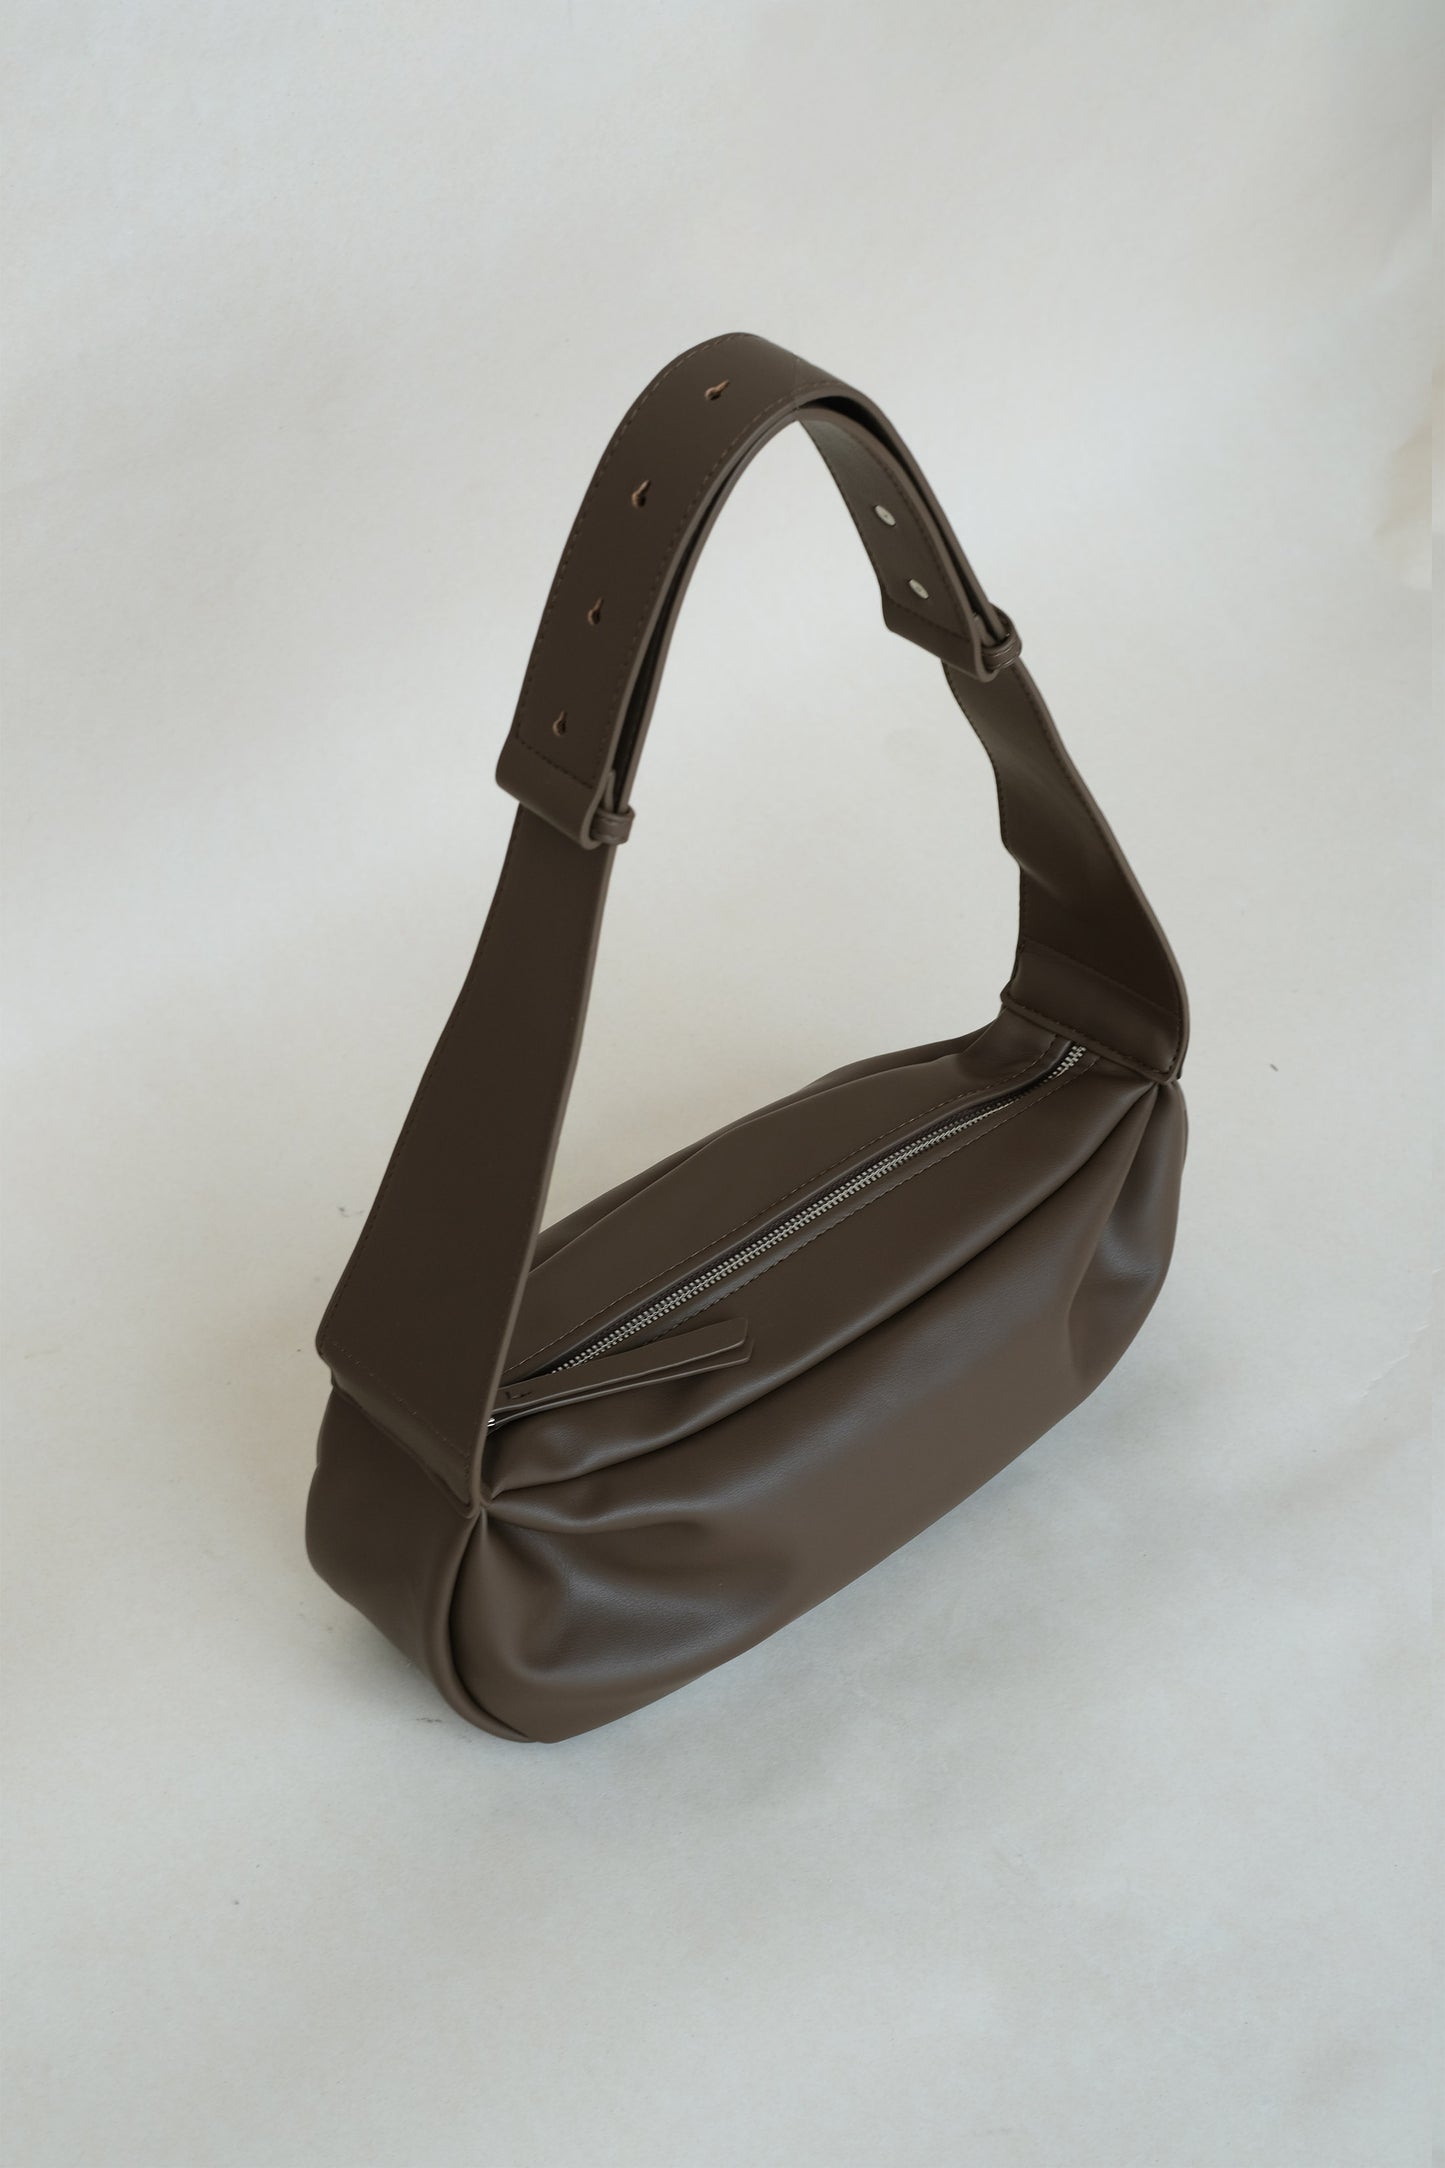 PU soft leather pillow bag in mud color